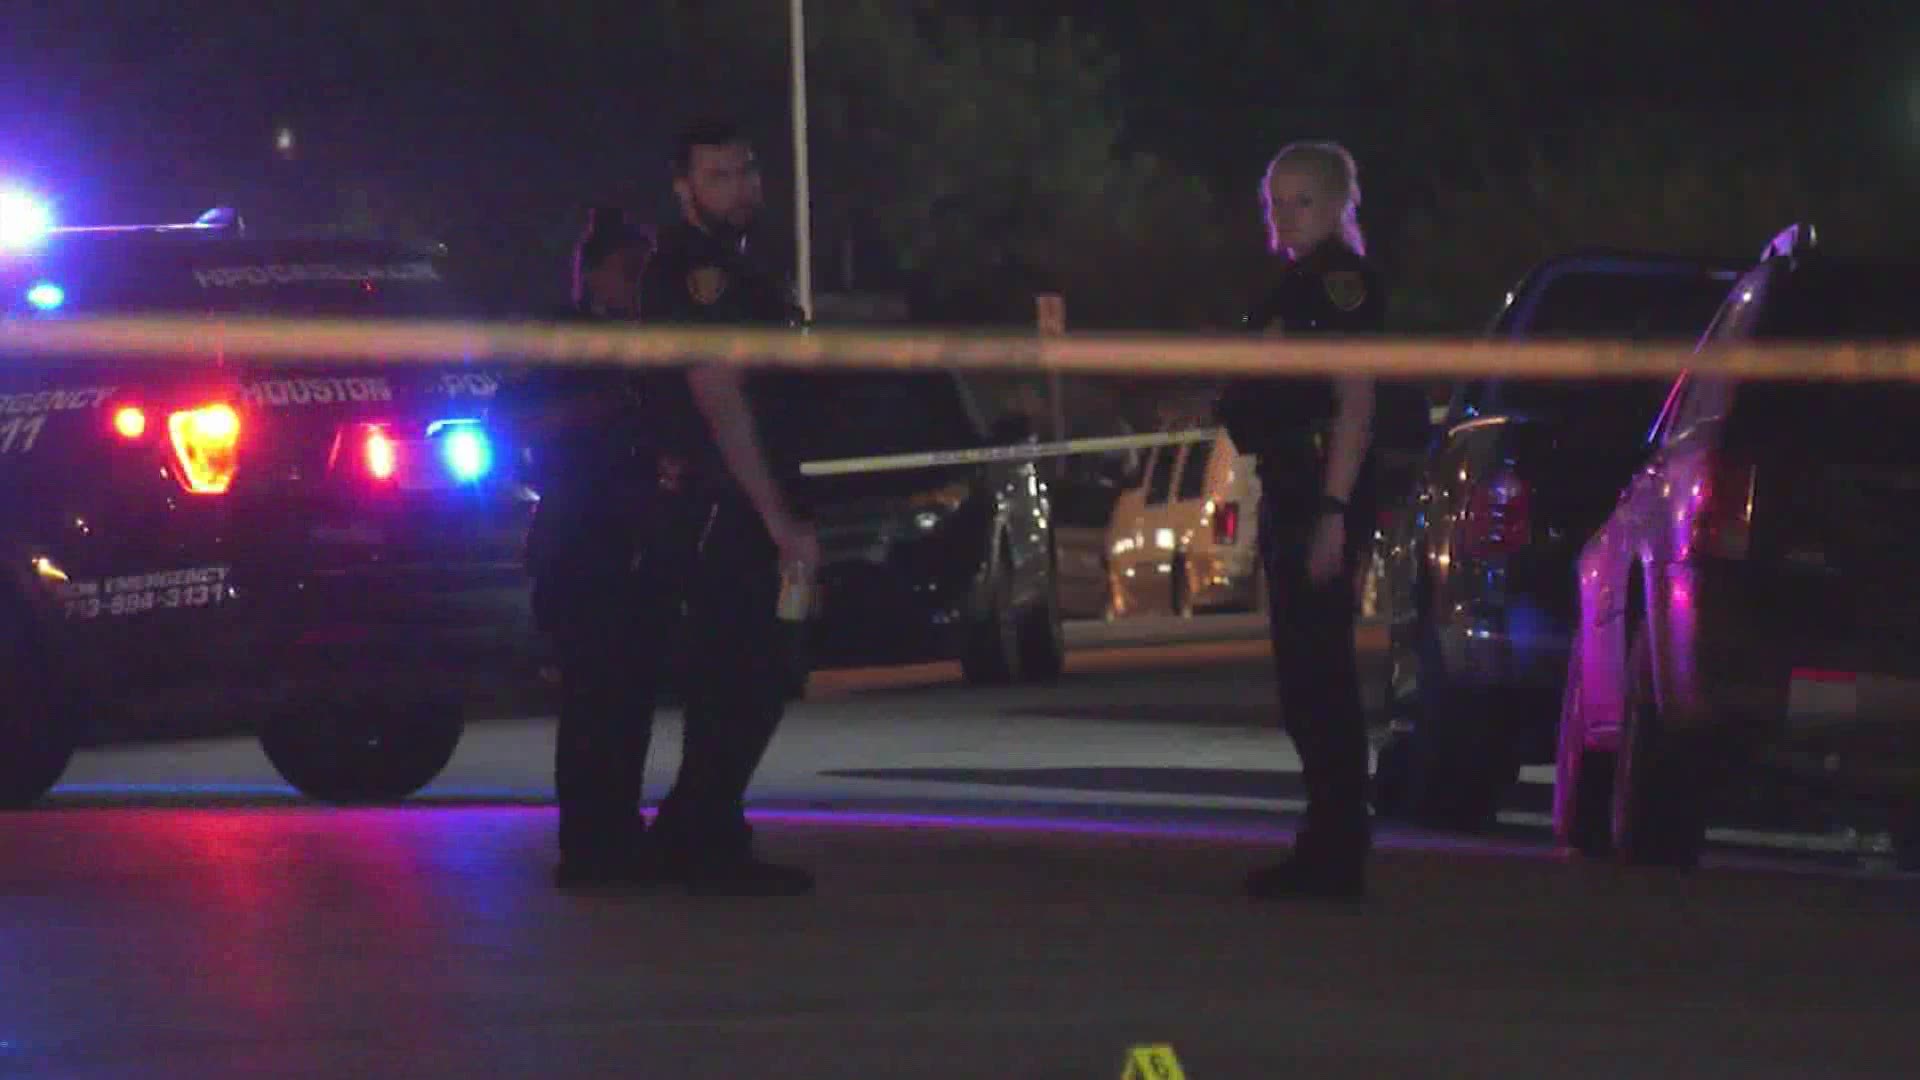 A 15-year-old who was sitting in a car with their family was shot Friday night during a drive-by in Houston's northside. There are no suspects in custody.